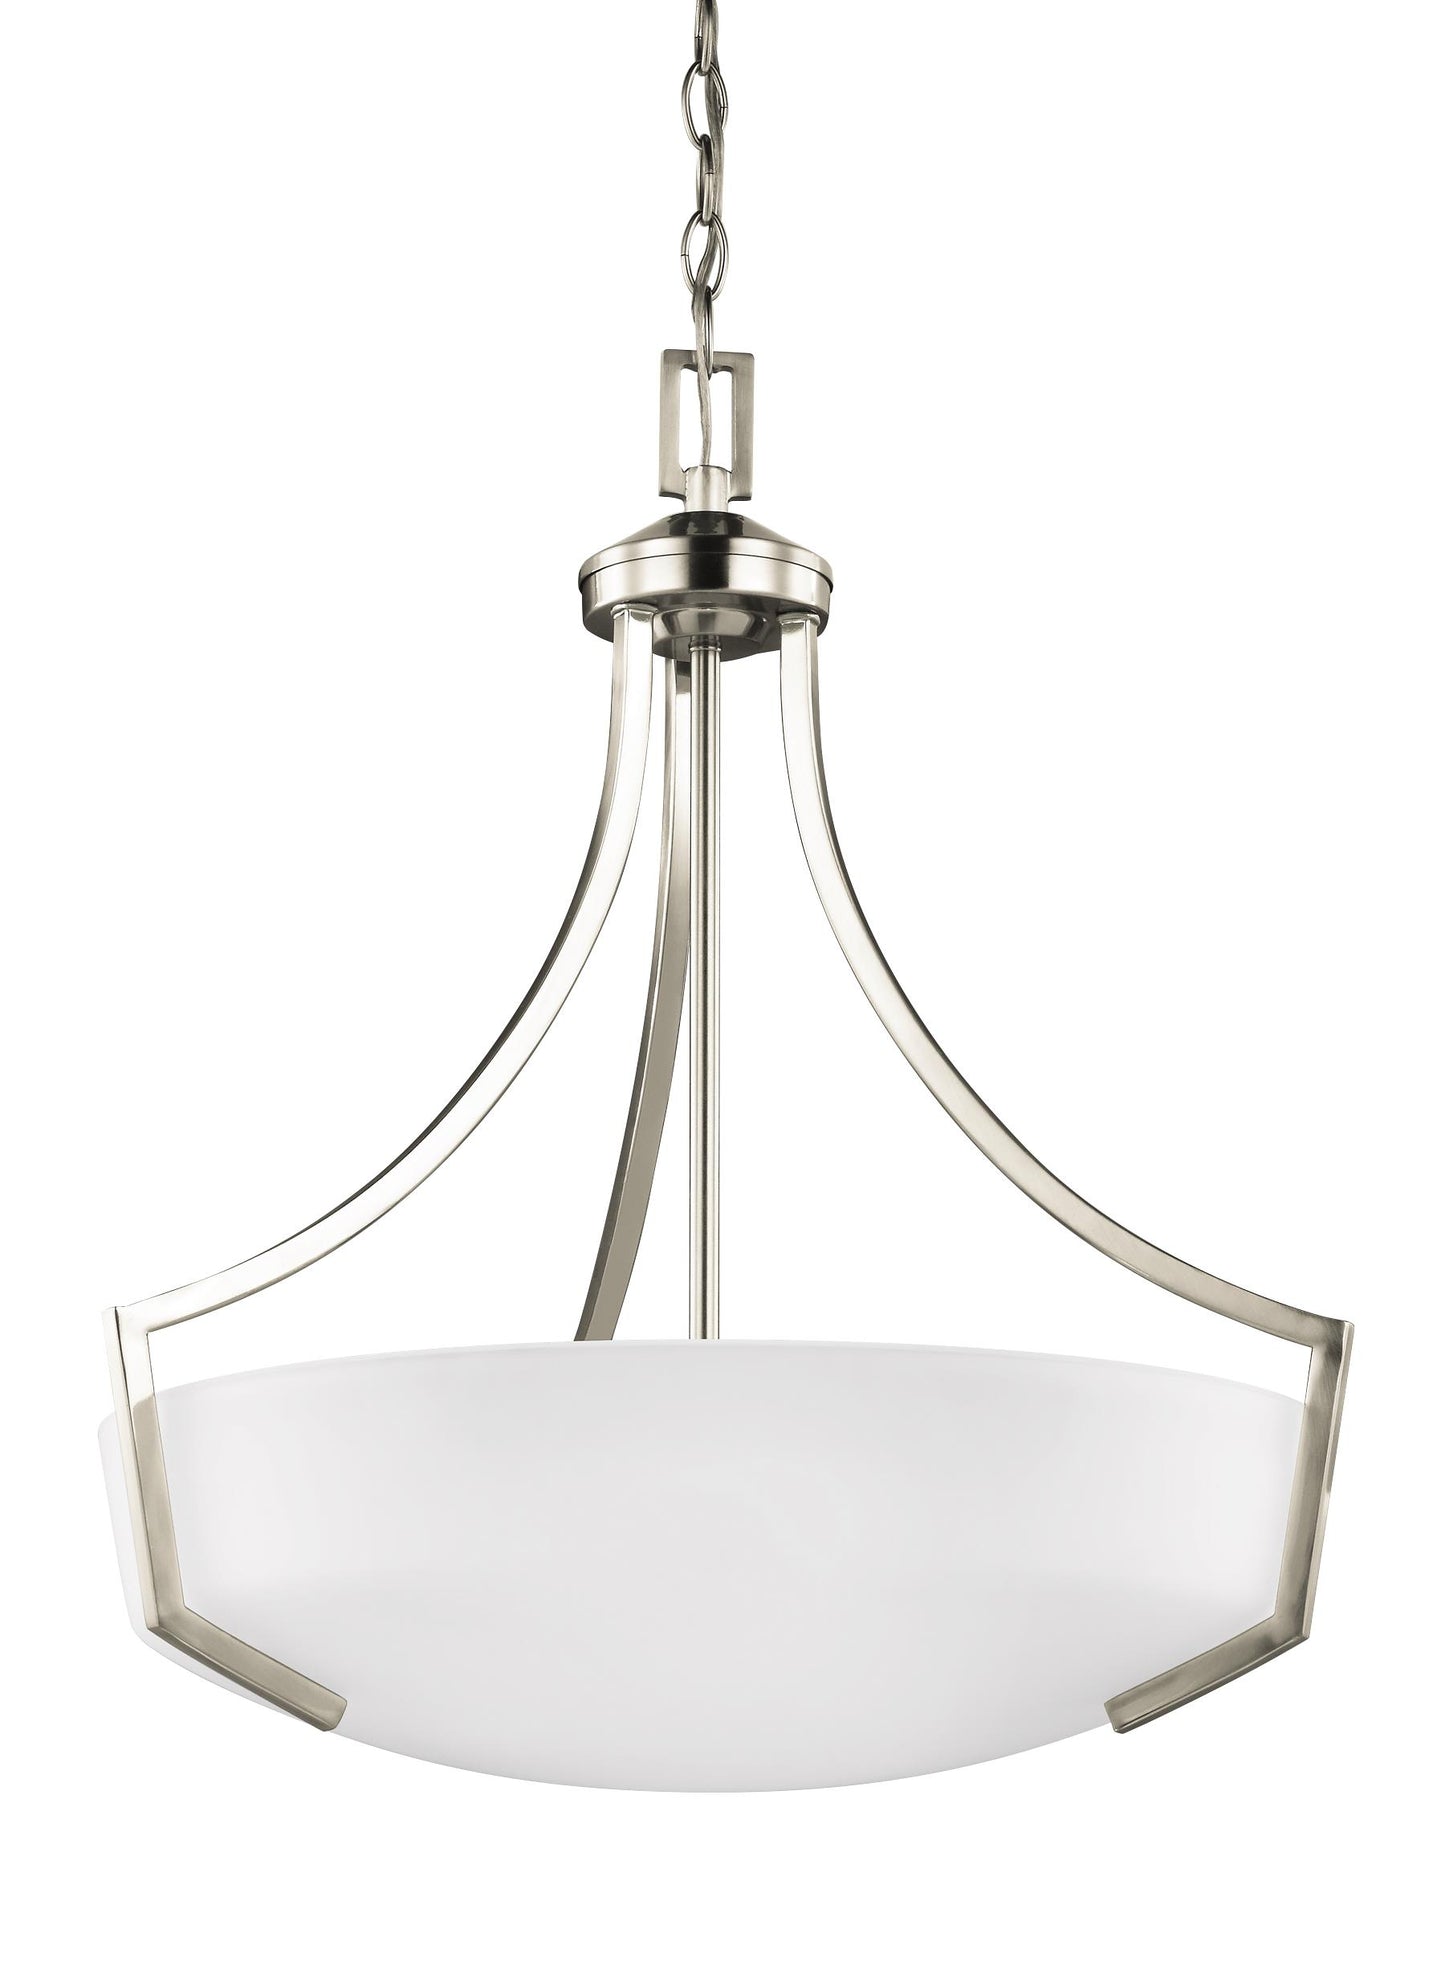 Hanford traditional 3-light indoor dimmable ceiling pendant hanging chandelier pendant light in brushed nickel silver fini...